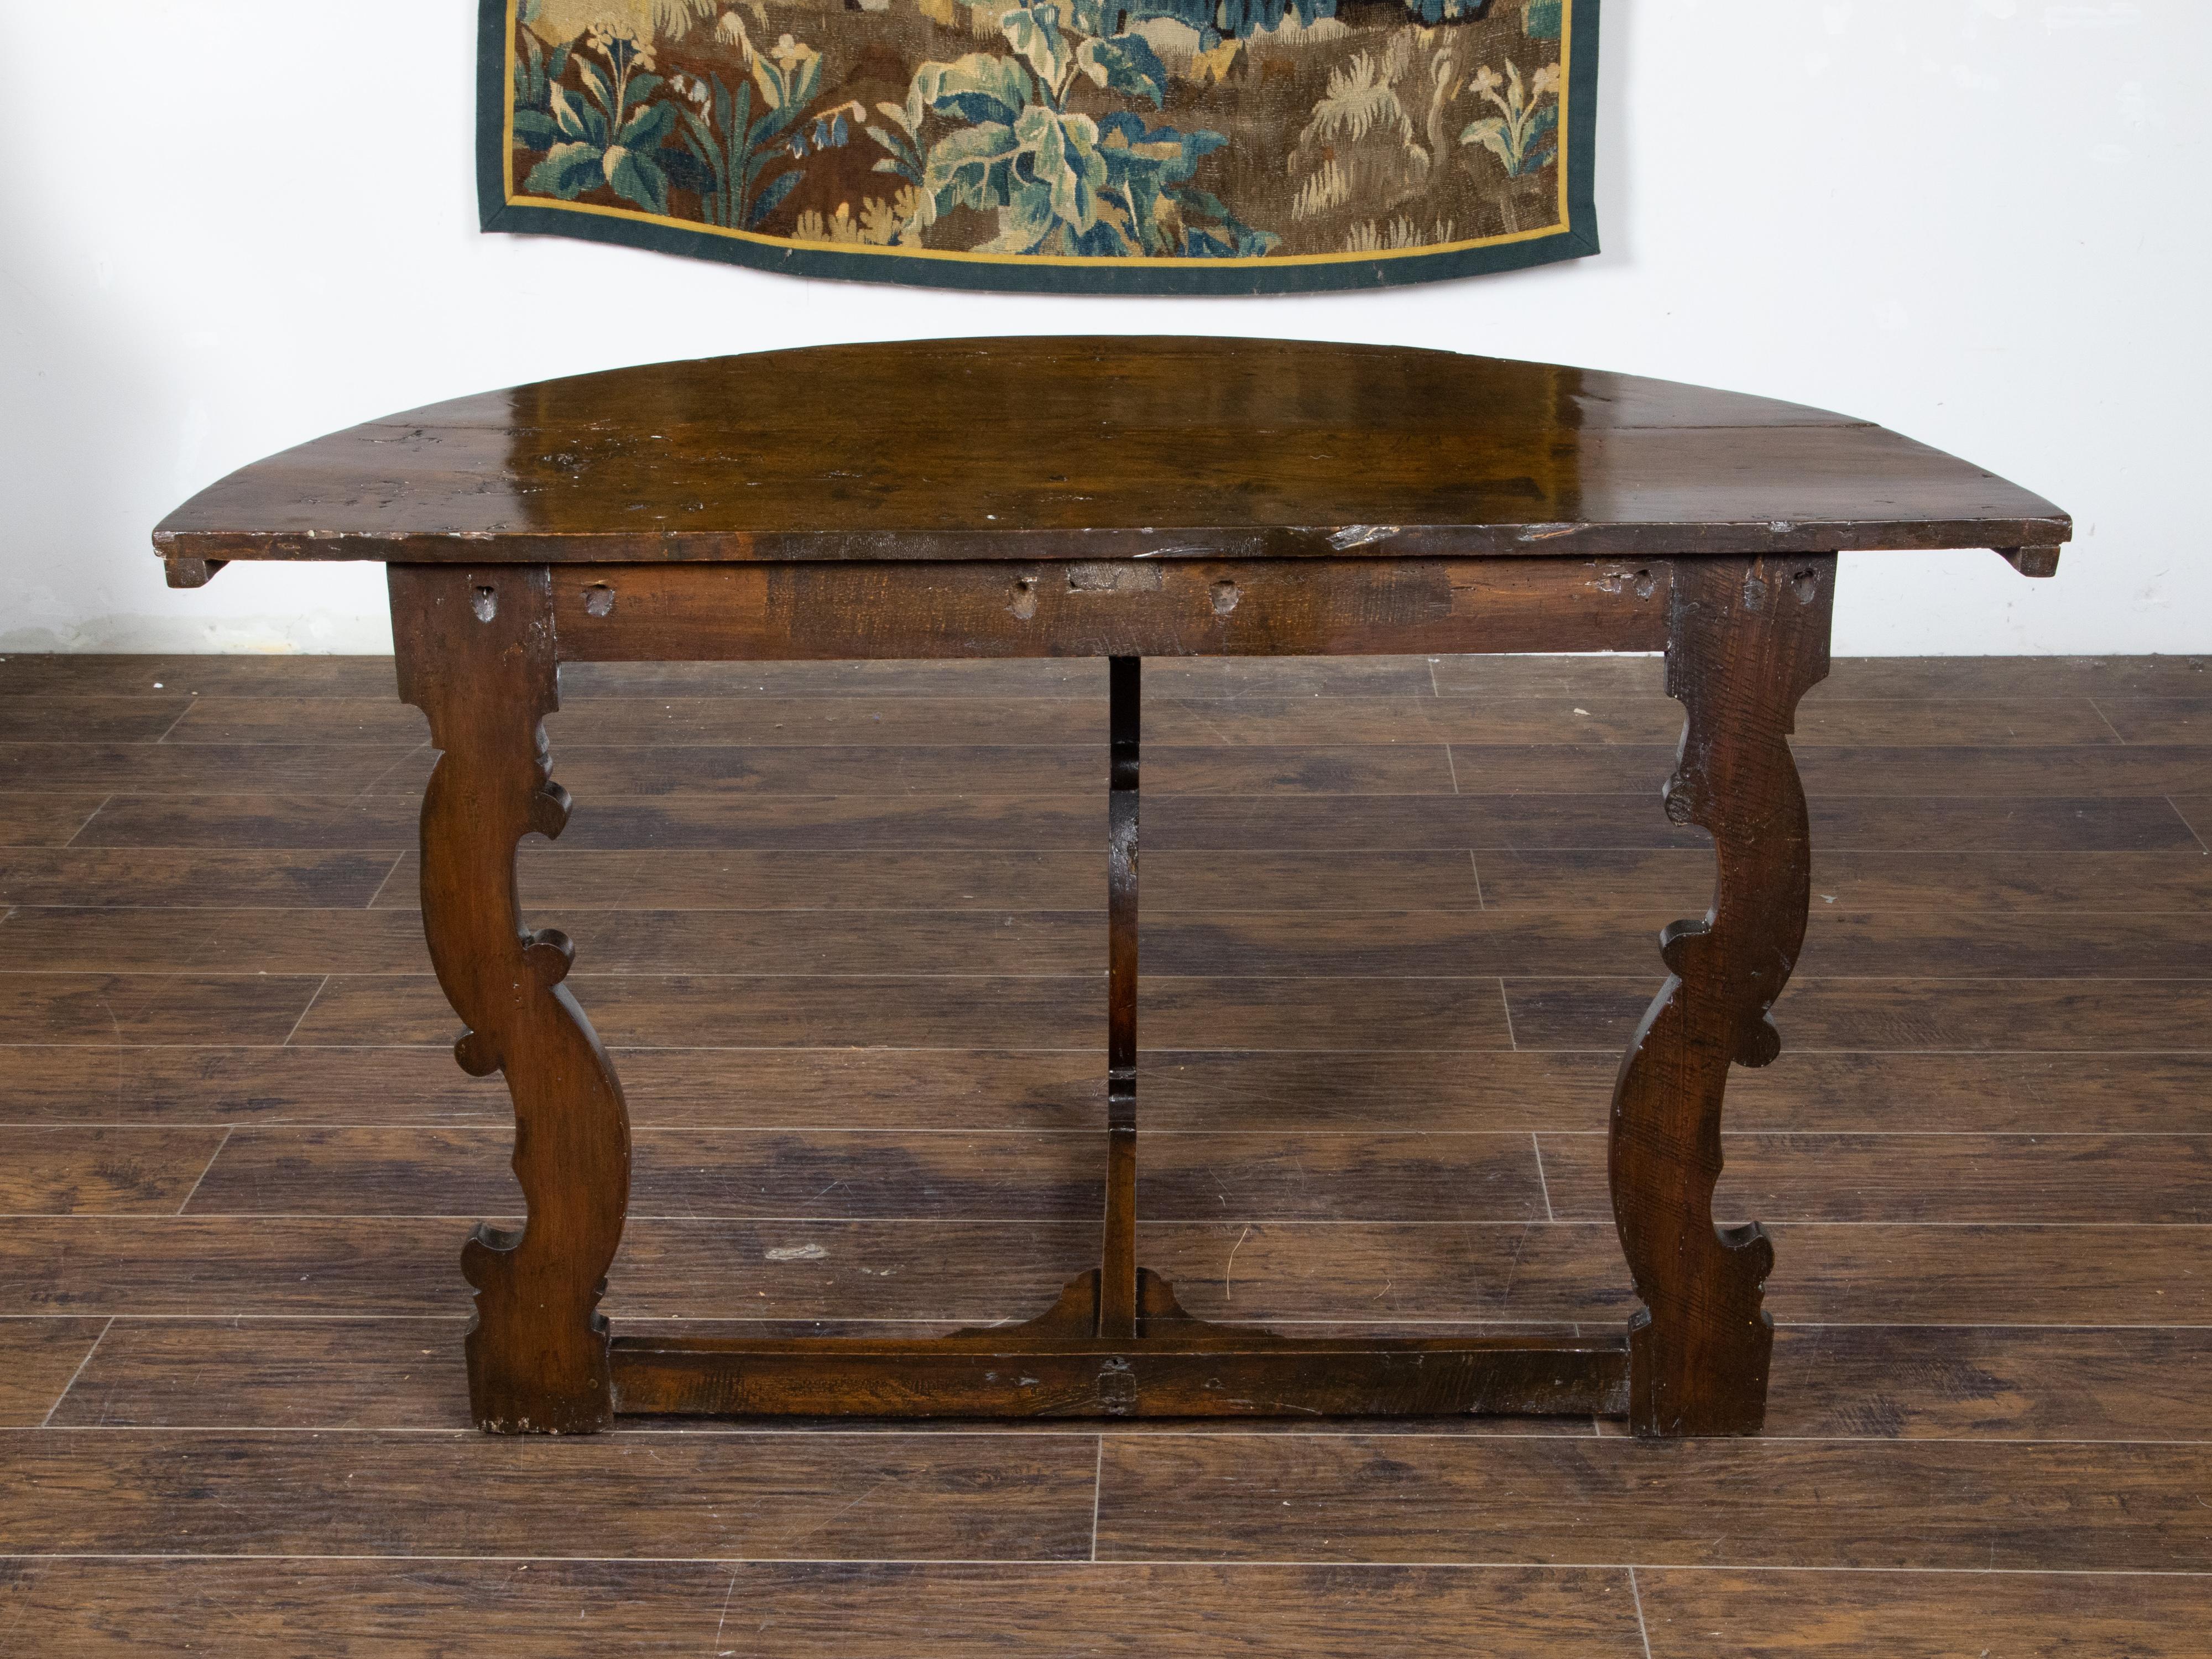 Large Italian Baroque Style 18th Century Walnut Demilune Table with Carved Legs For Sale 3